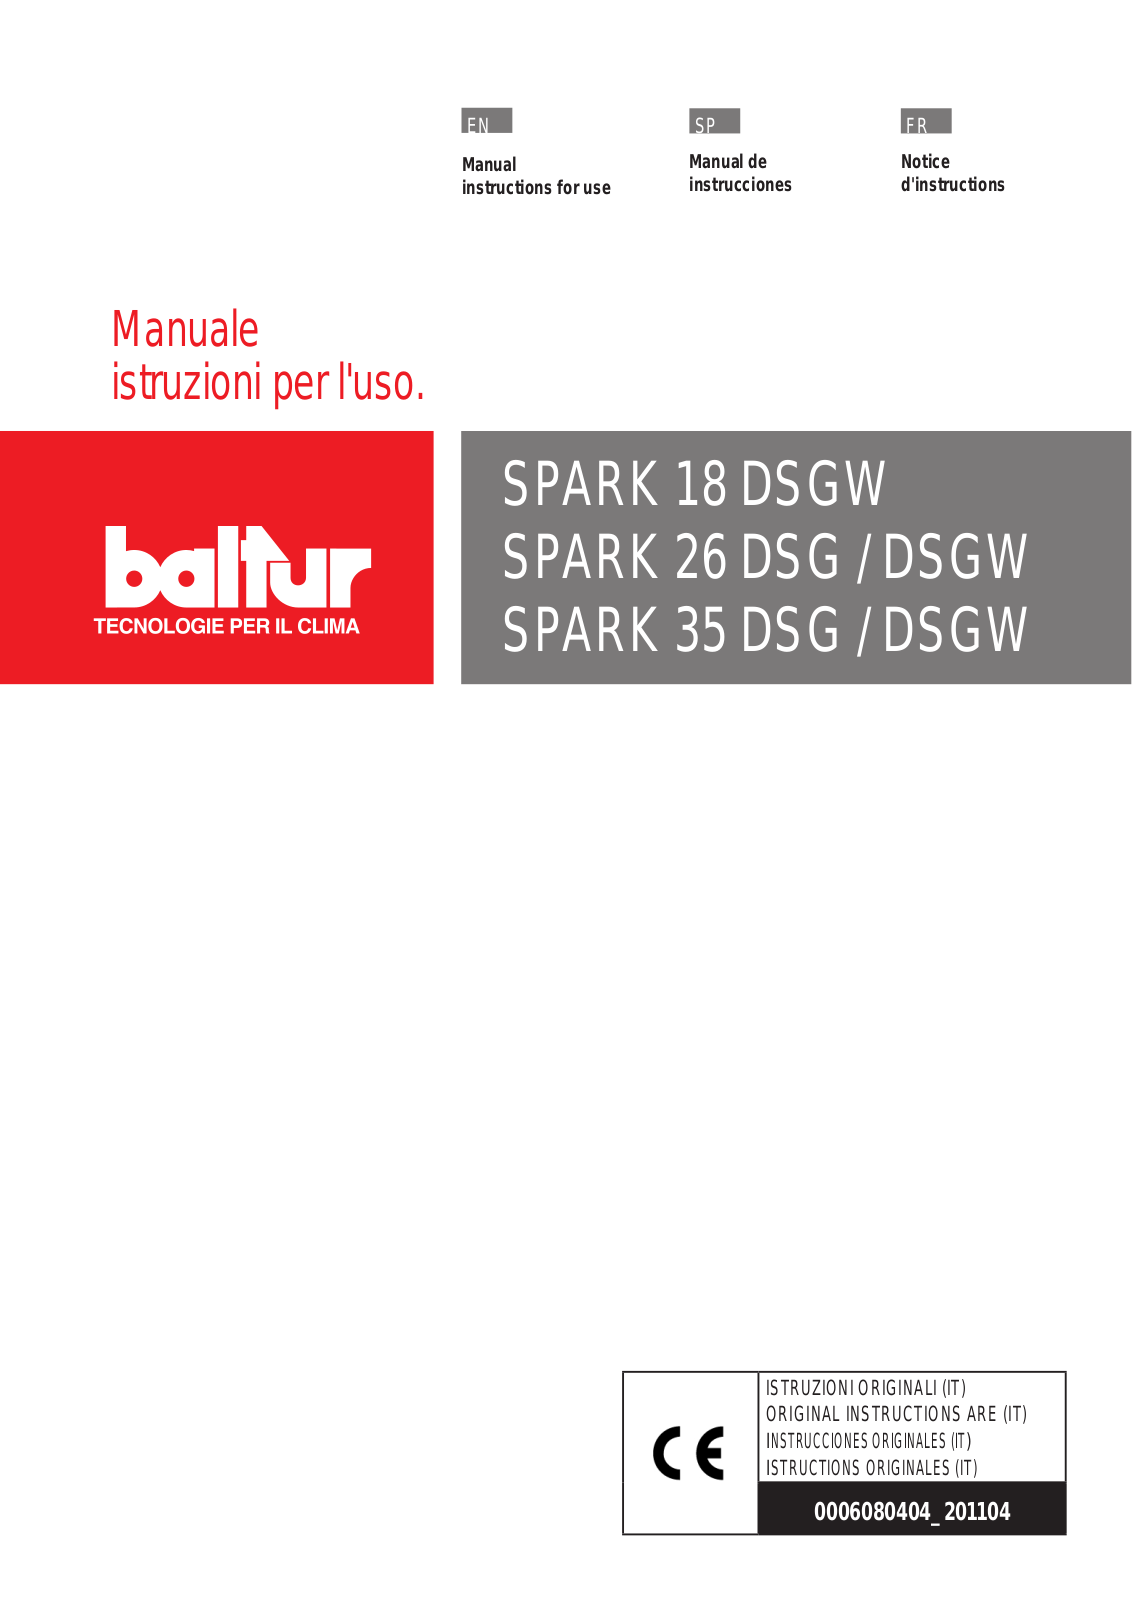 baltur Spark 18 DSGW, Spark 26 DSG, Spark 35 DSG, Spark 26 DSGW, Spark 35 DSGW Instruction Manual